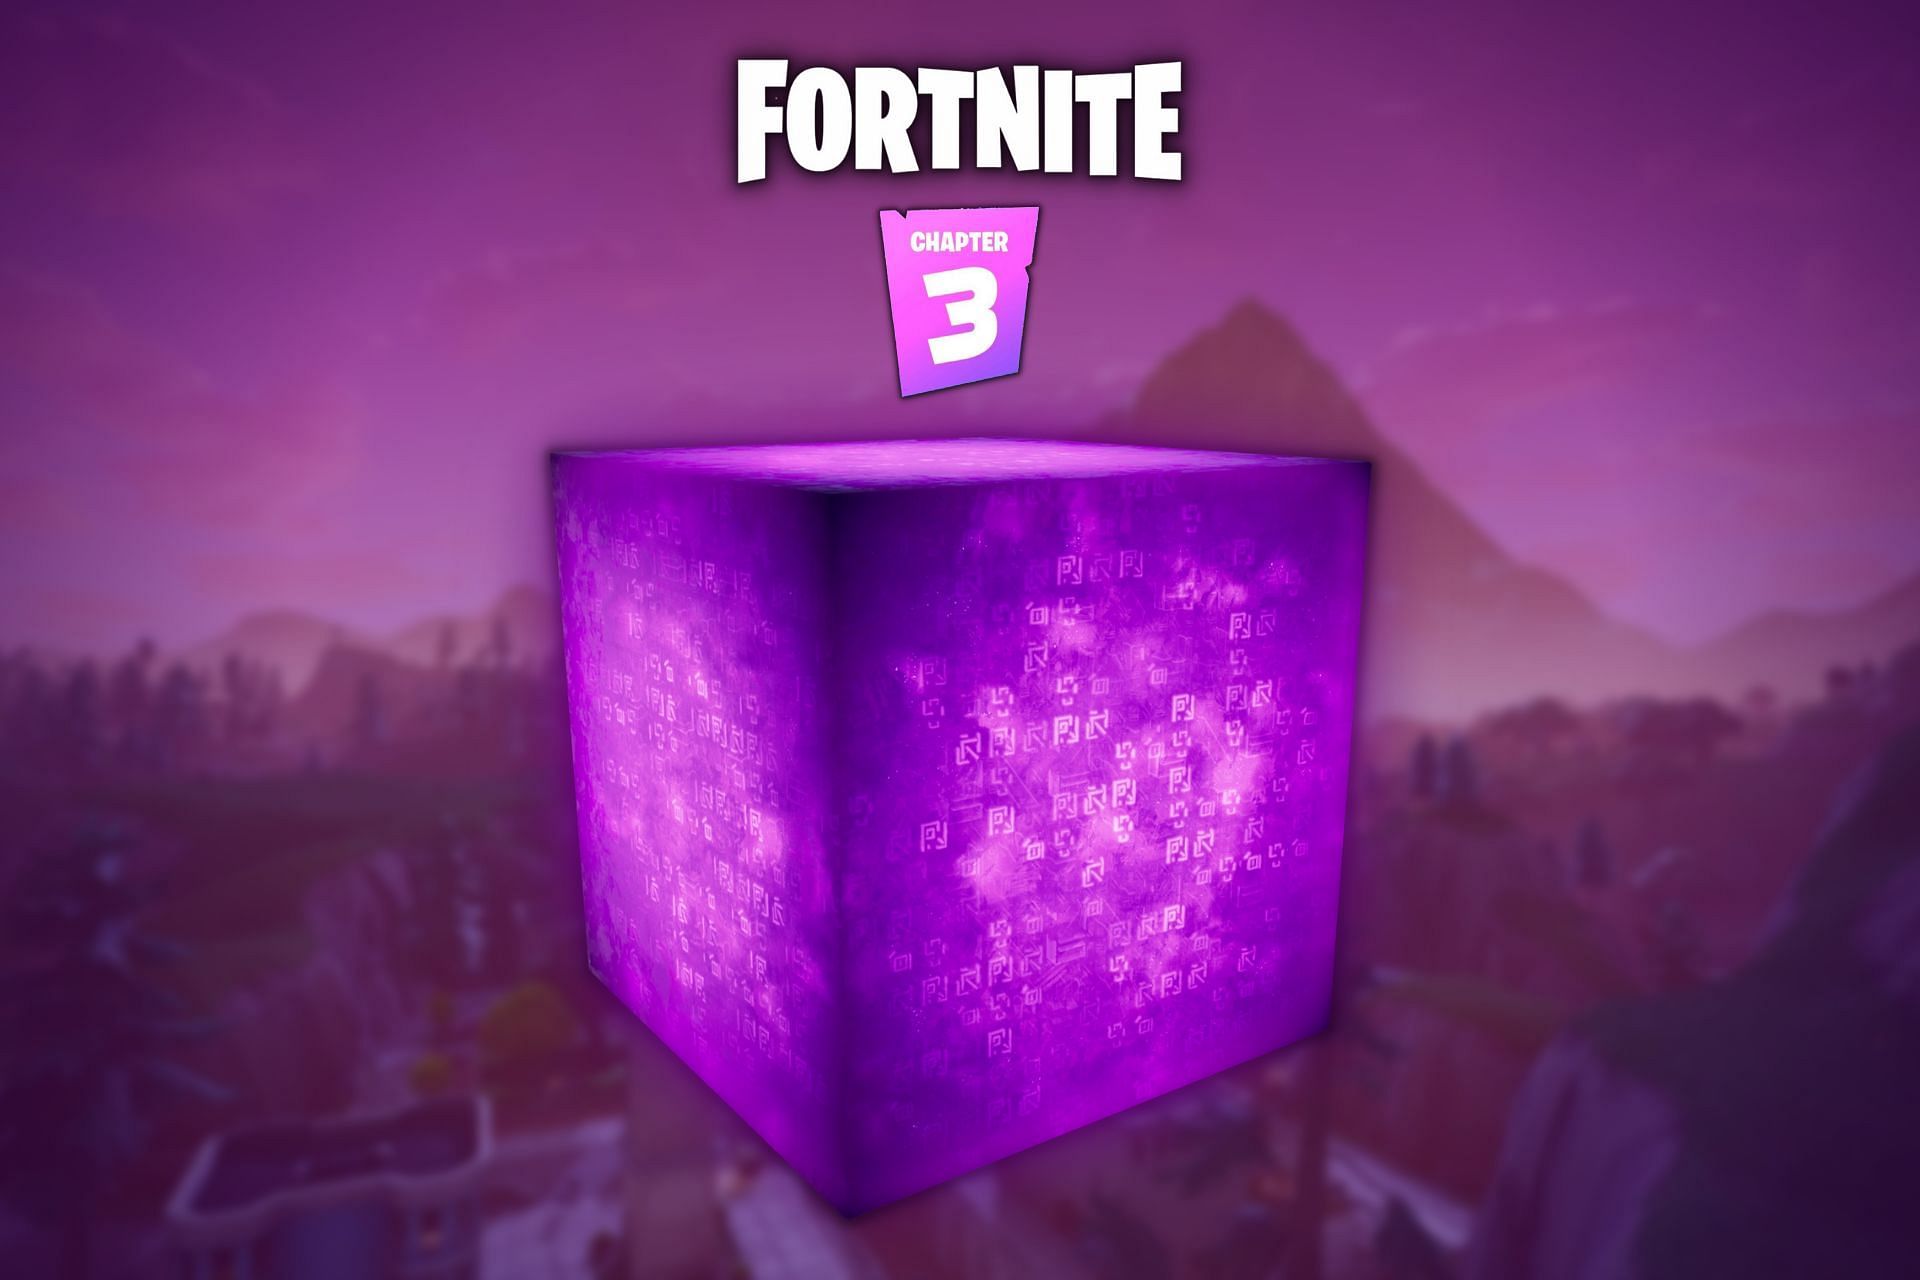 Fortnite Chapter 3 might see the return of Kevin the Cube (Image via Sportskeeda)